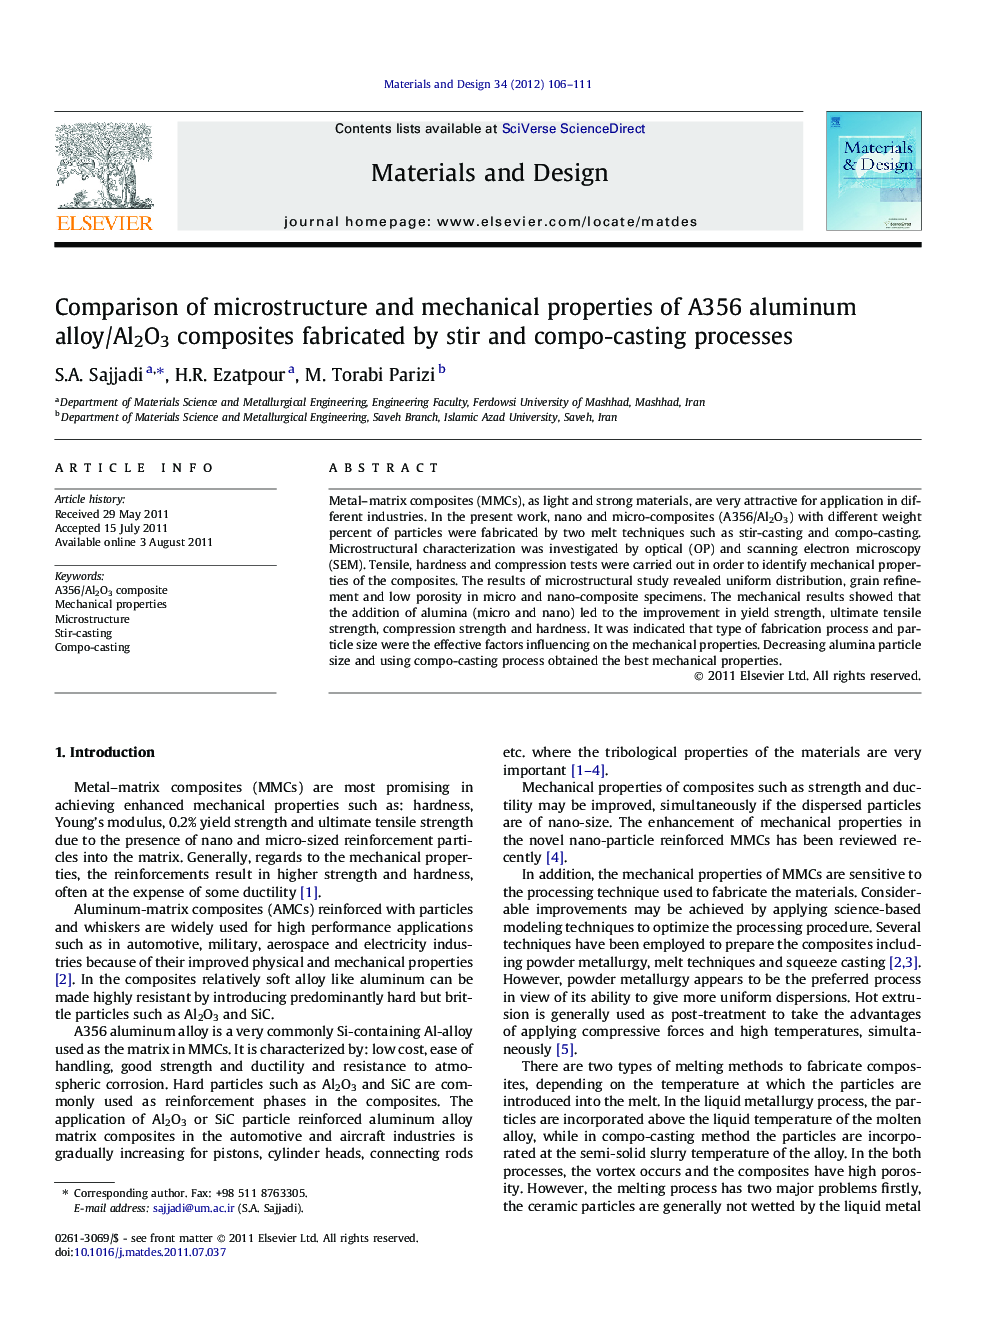 Comparison of microstructure and mechanical properties of A356 aluminum alloy/Al2O3 composites fabricated by stir and compo-casting processes